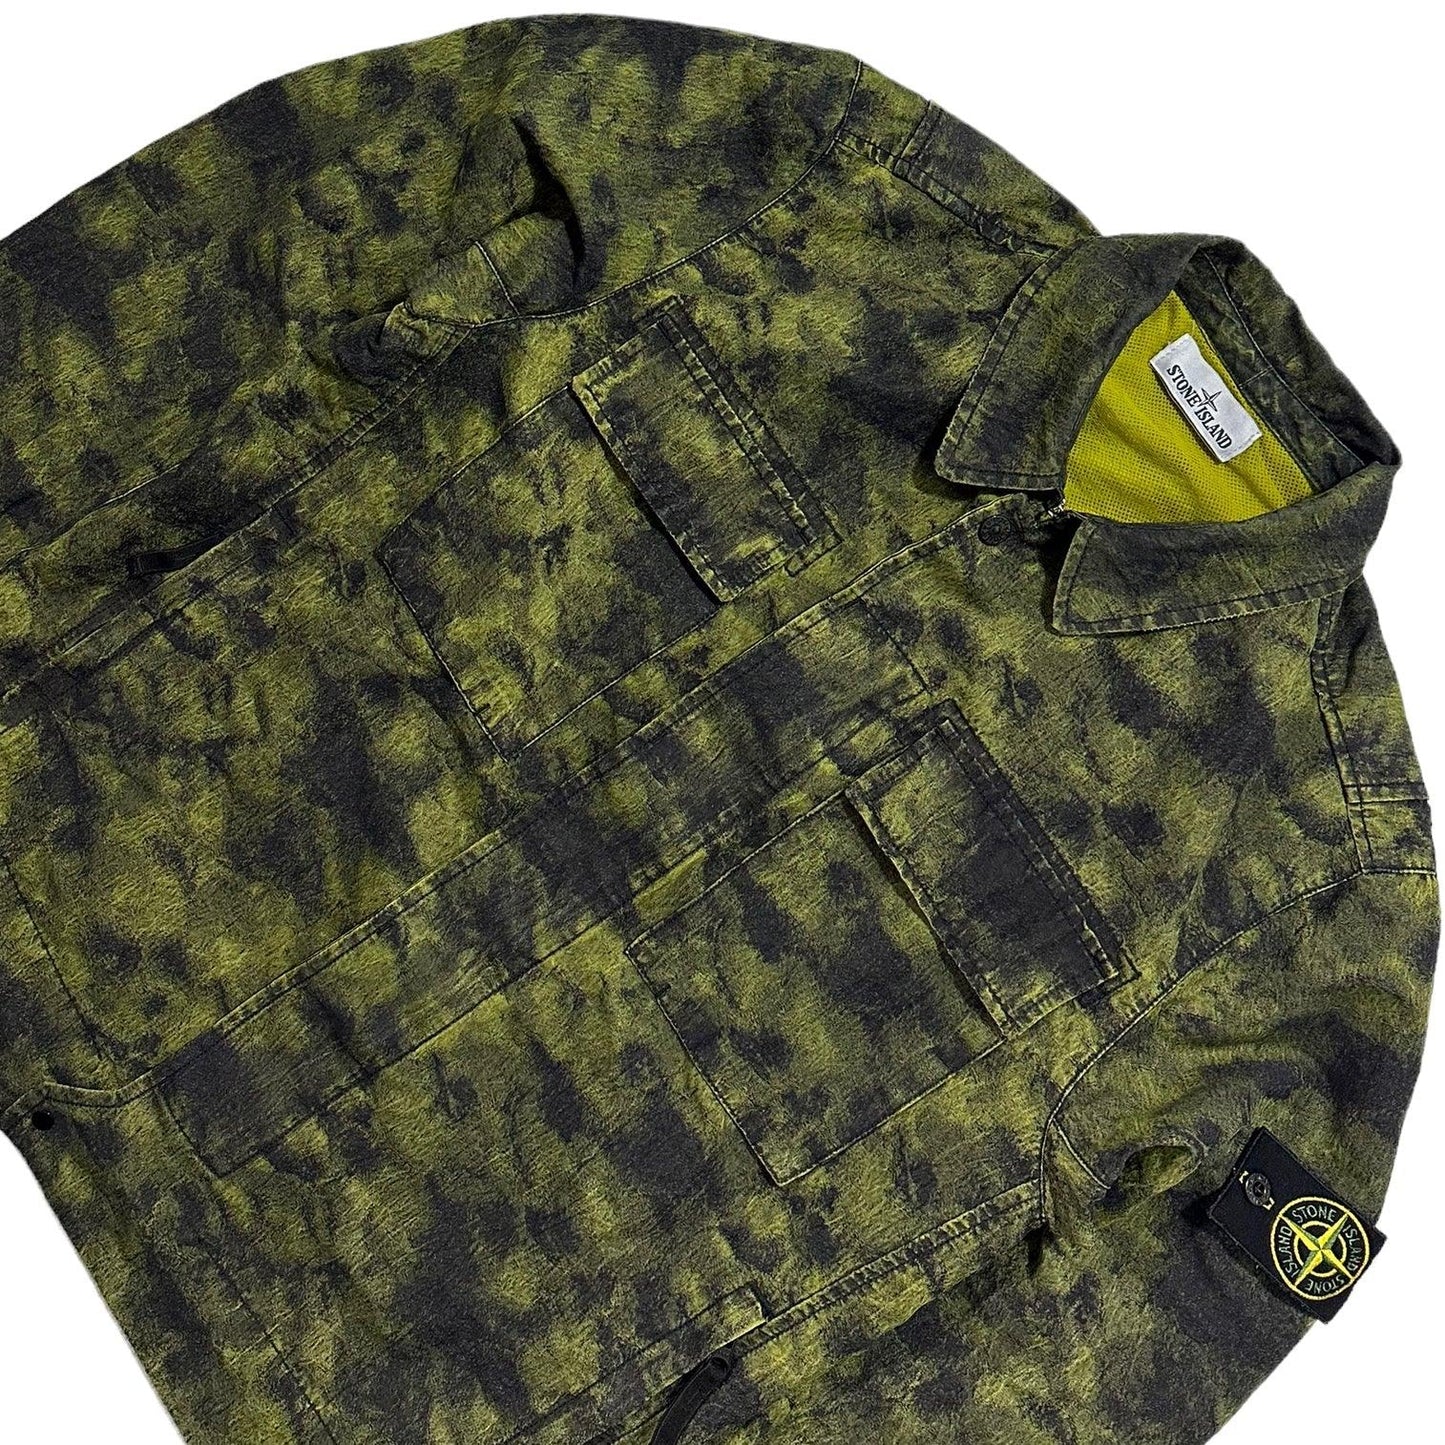 Stone Island DPM Jacquard Plated Plated Button Up Jacket - Known Source